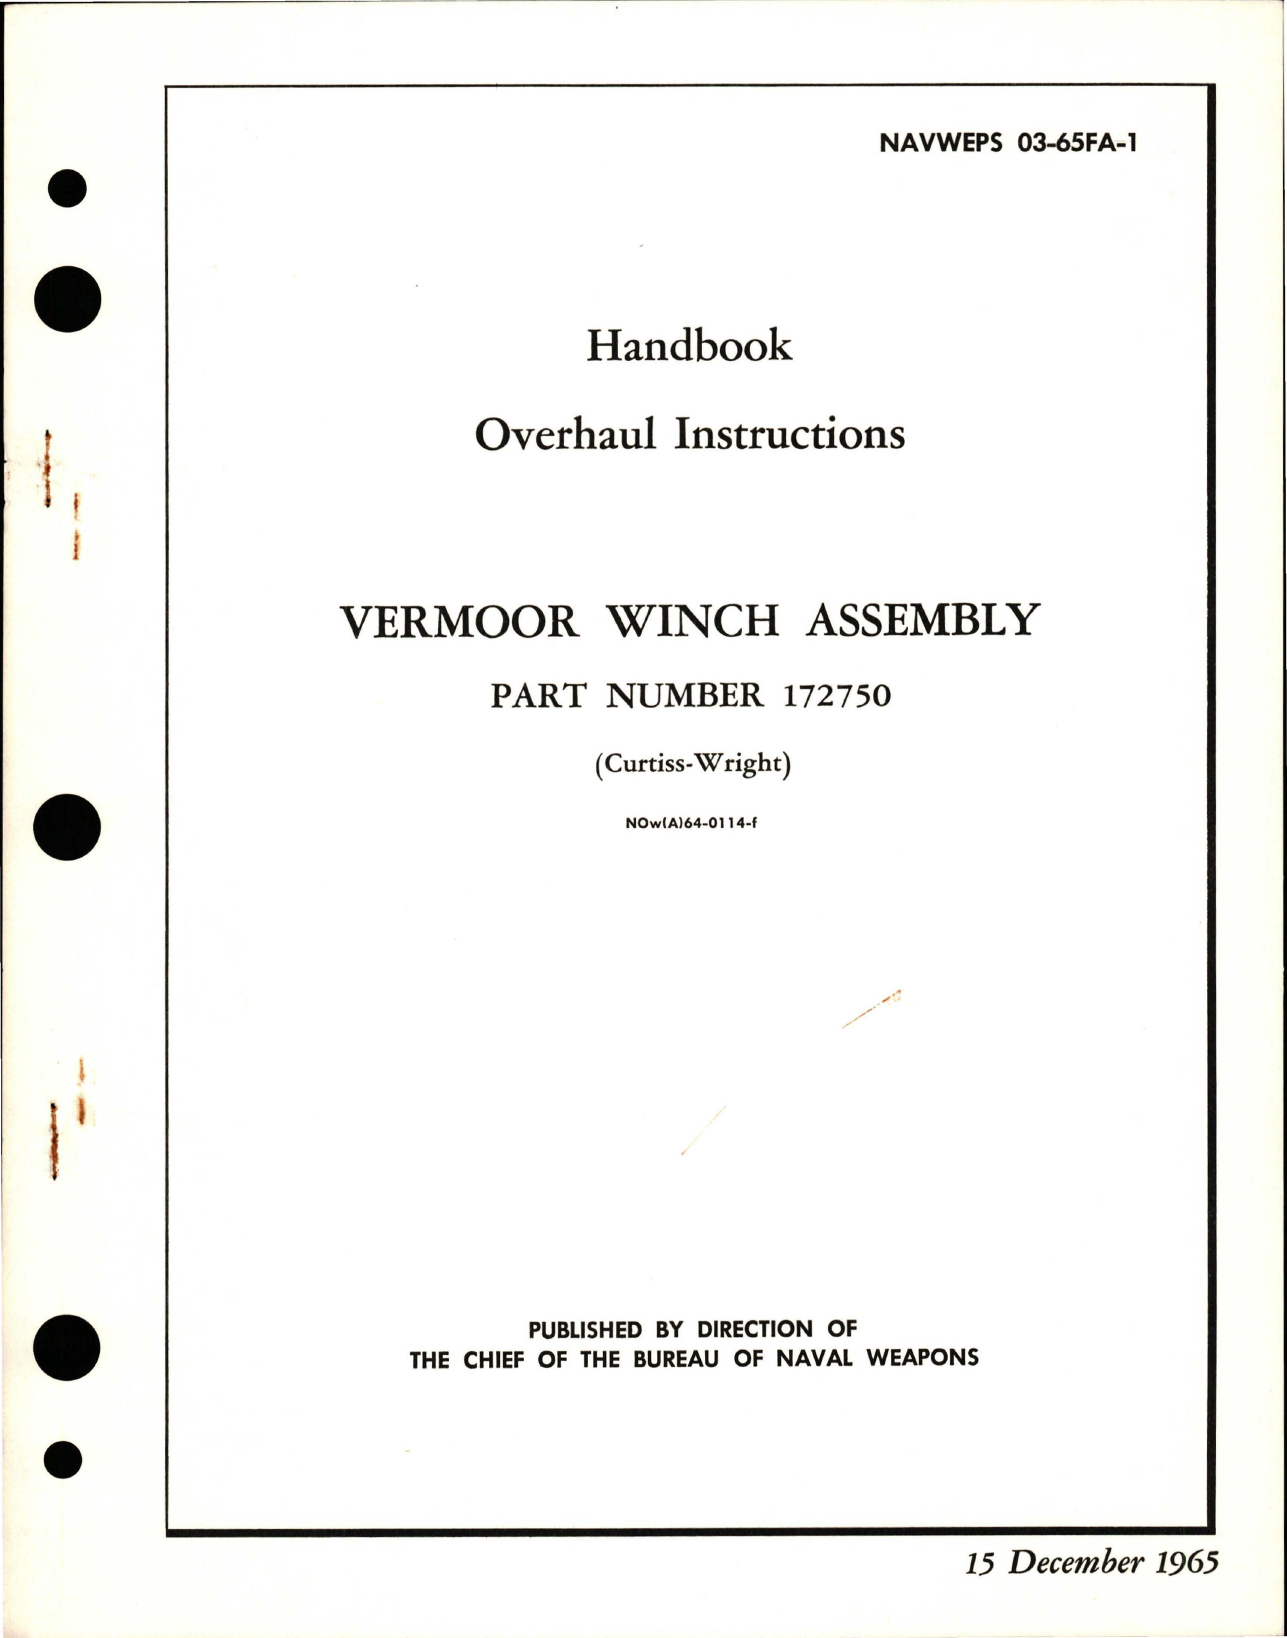 Sample page 1 from AirCorps Library document: Overhaul Instructions for Vermoor Winch Assembly - Part 172750